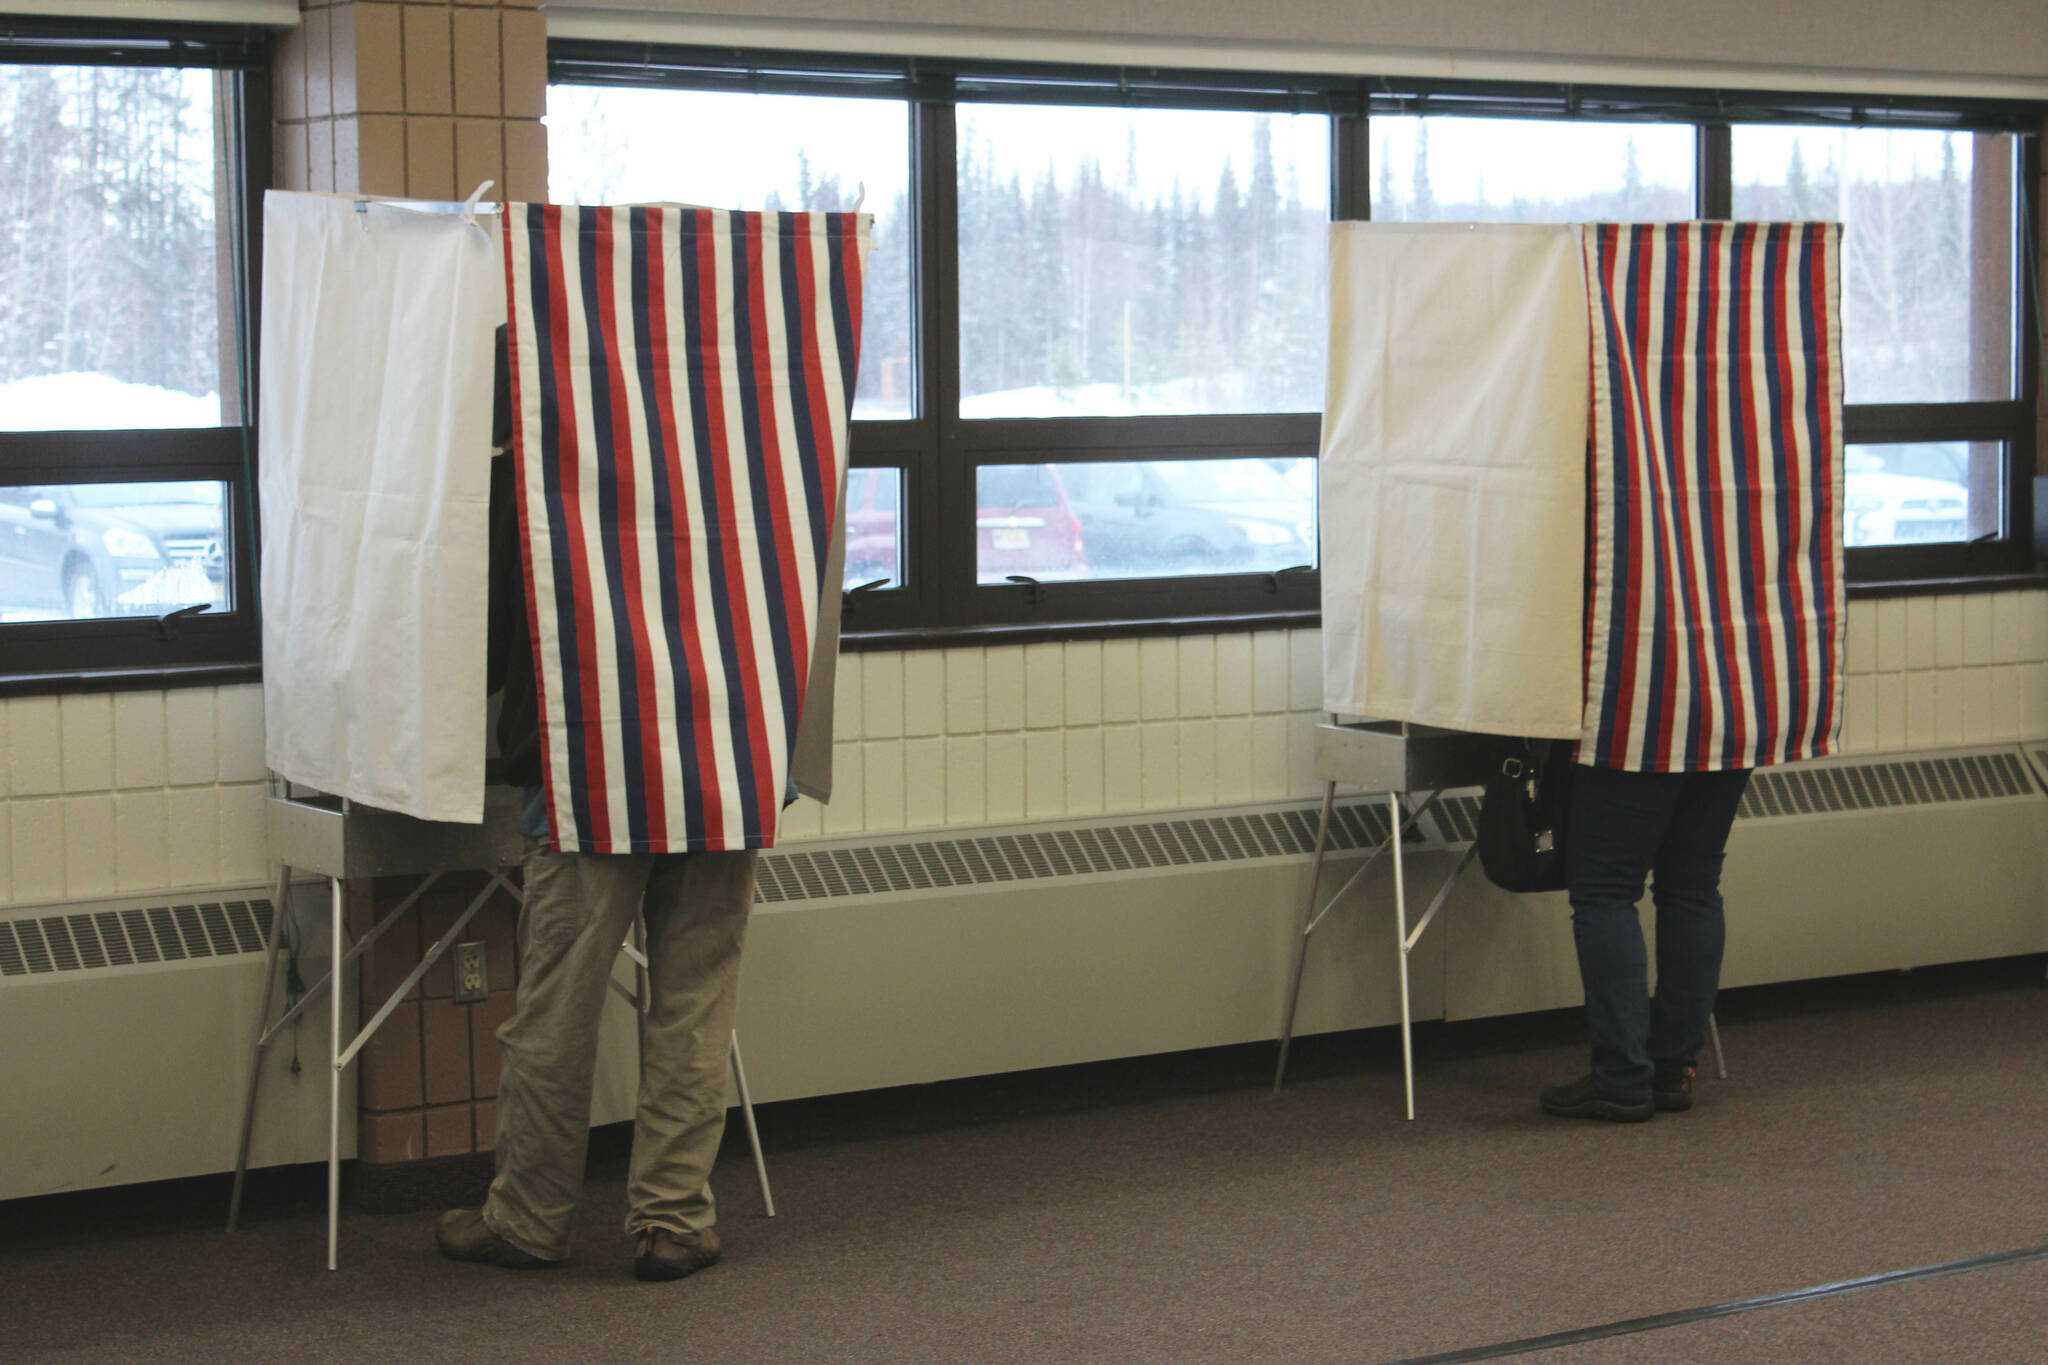 People vote in polling booths at the Soldotna Regional Sports Complex on Tuesday, Nov. 8, 2022 in Soldotna, Alaska. (Ashlyn O’Hara/Peninsula Clarion)